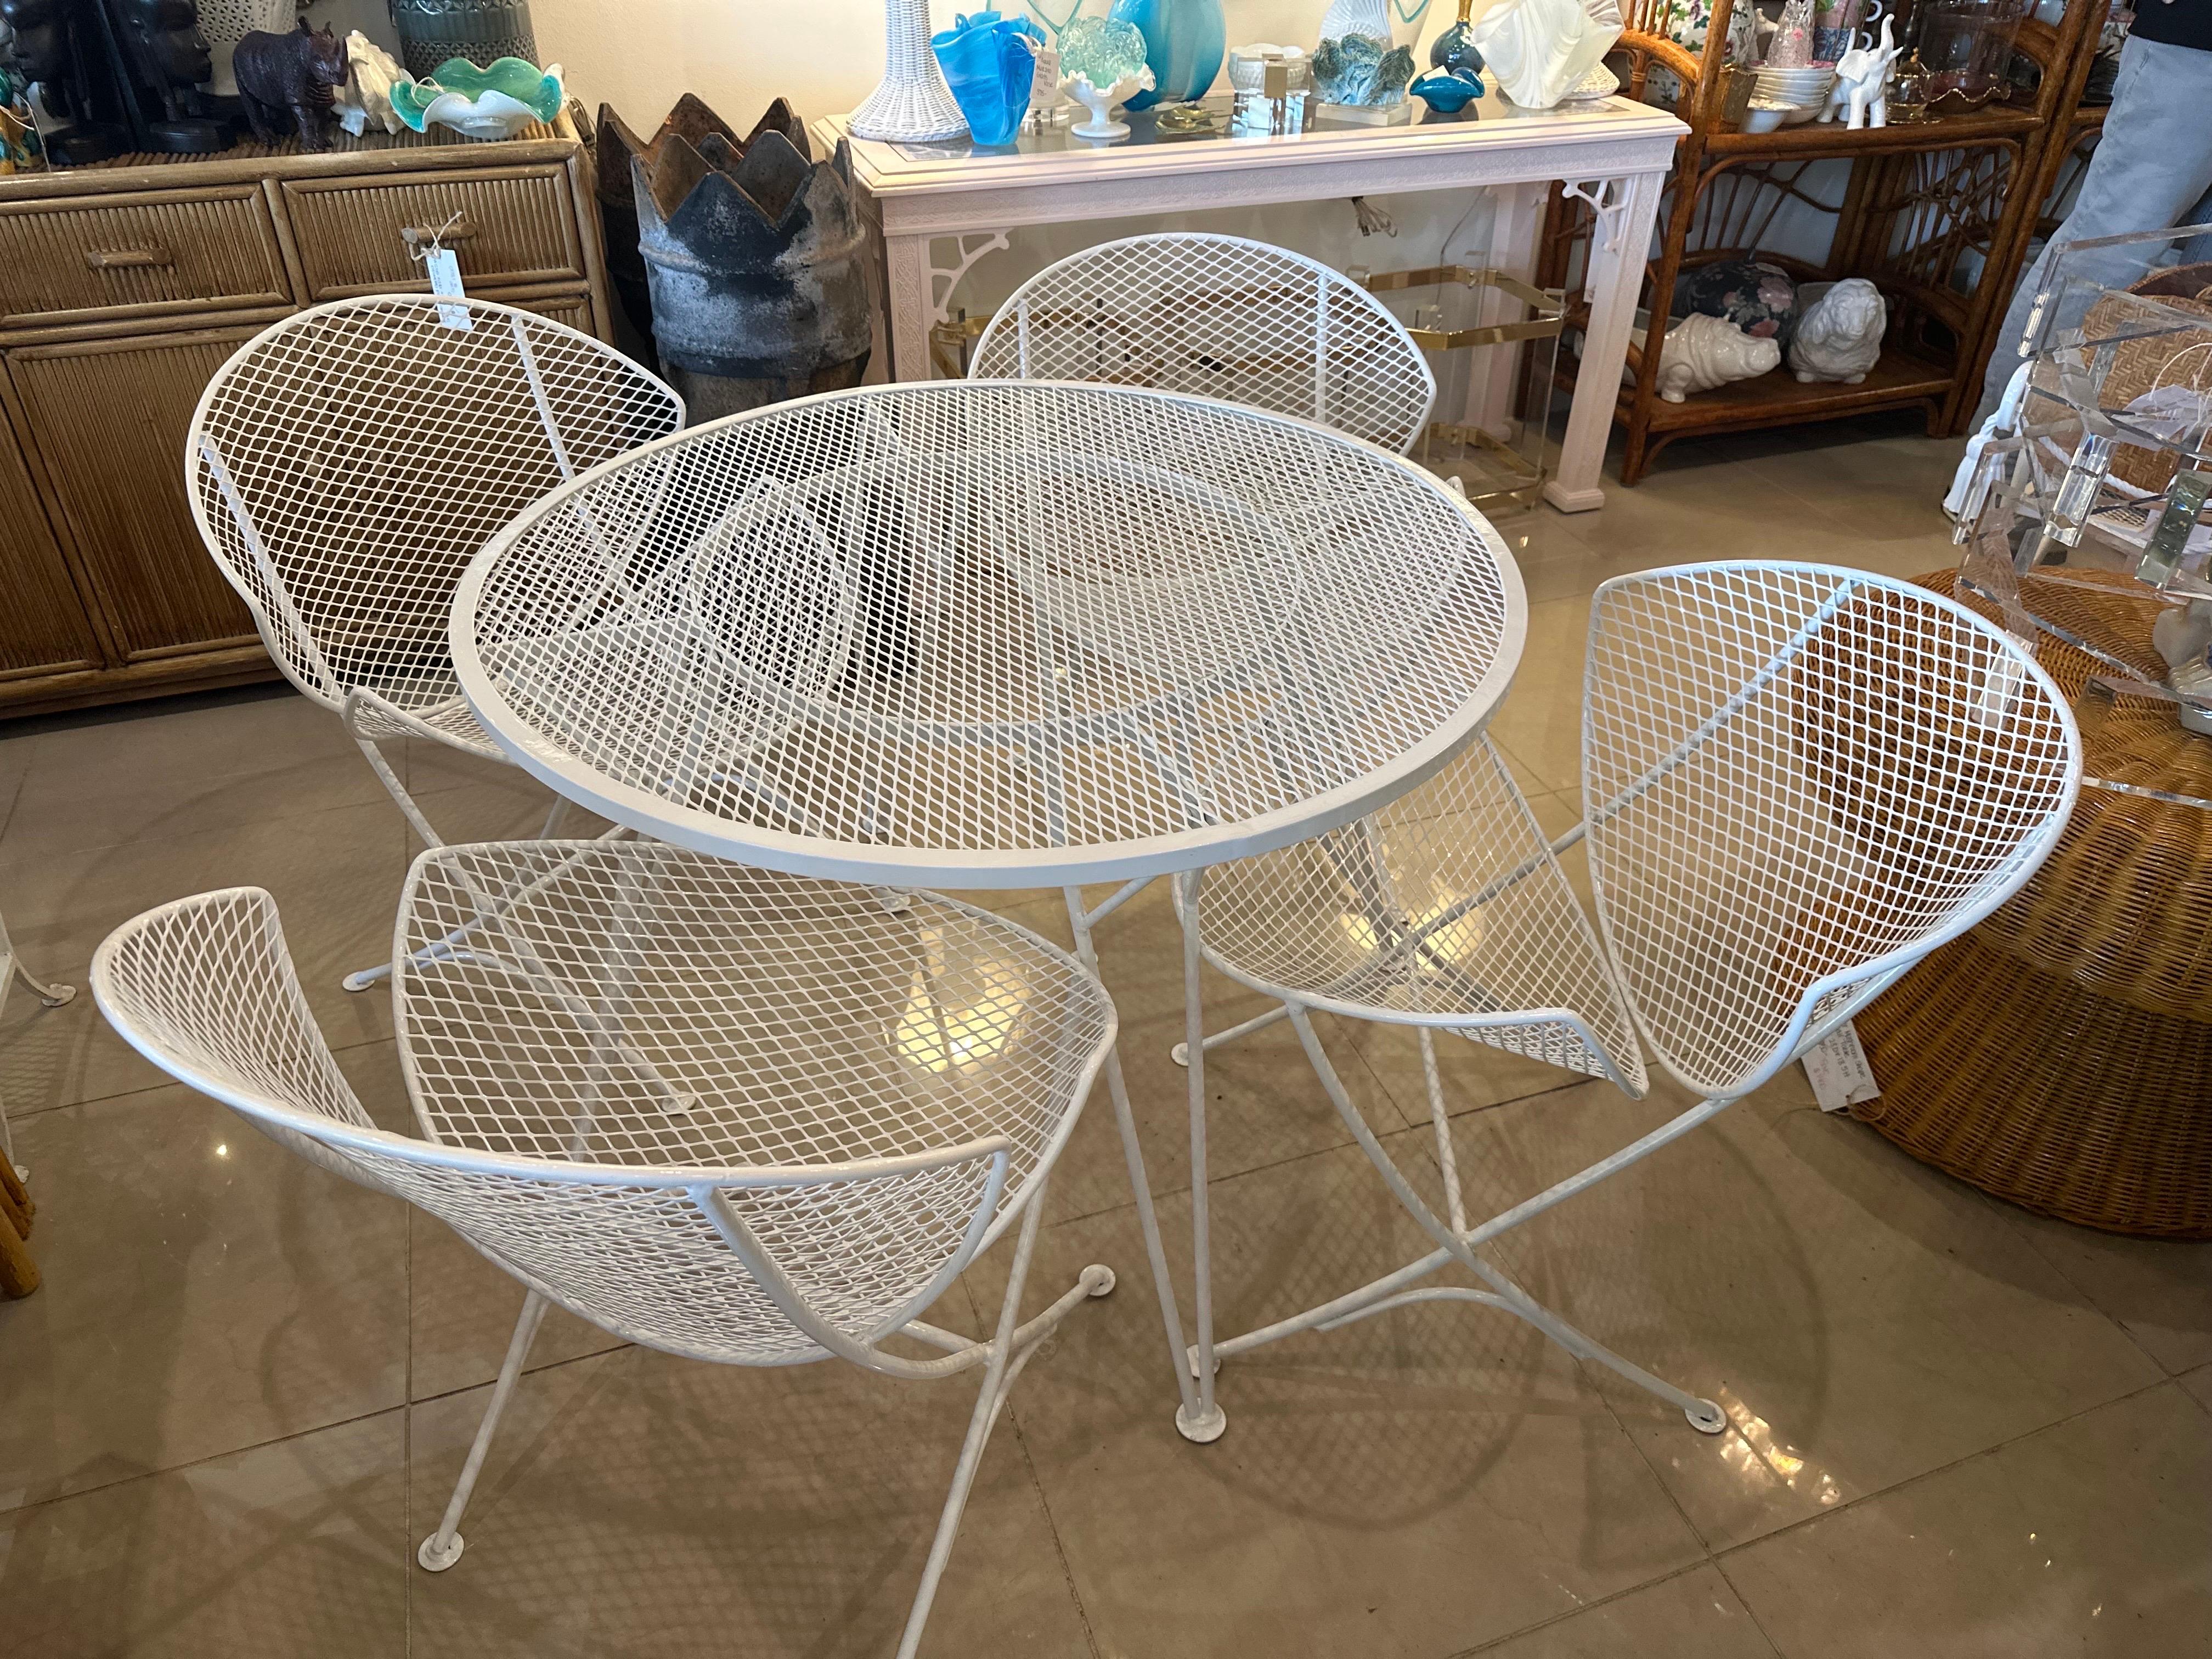 Mid Century Modern 5 Piece dining table patio outdoor sunroom set & 4 chairs. Design by Maurizio Tempestini for John Salterini. This set has been freshly powder-coated in white.  Chairs dimensions: 27.5 H x 19.5 D x 23 W Table dimensions: 36 D x